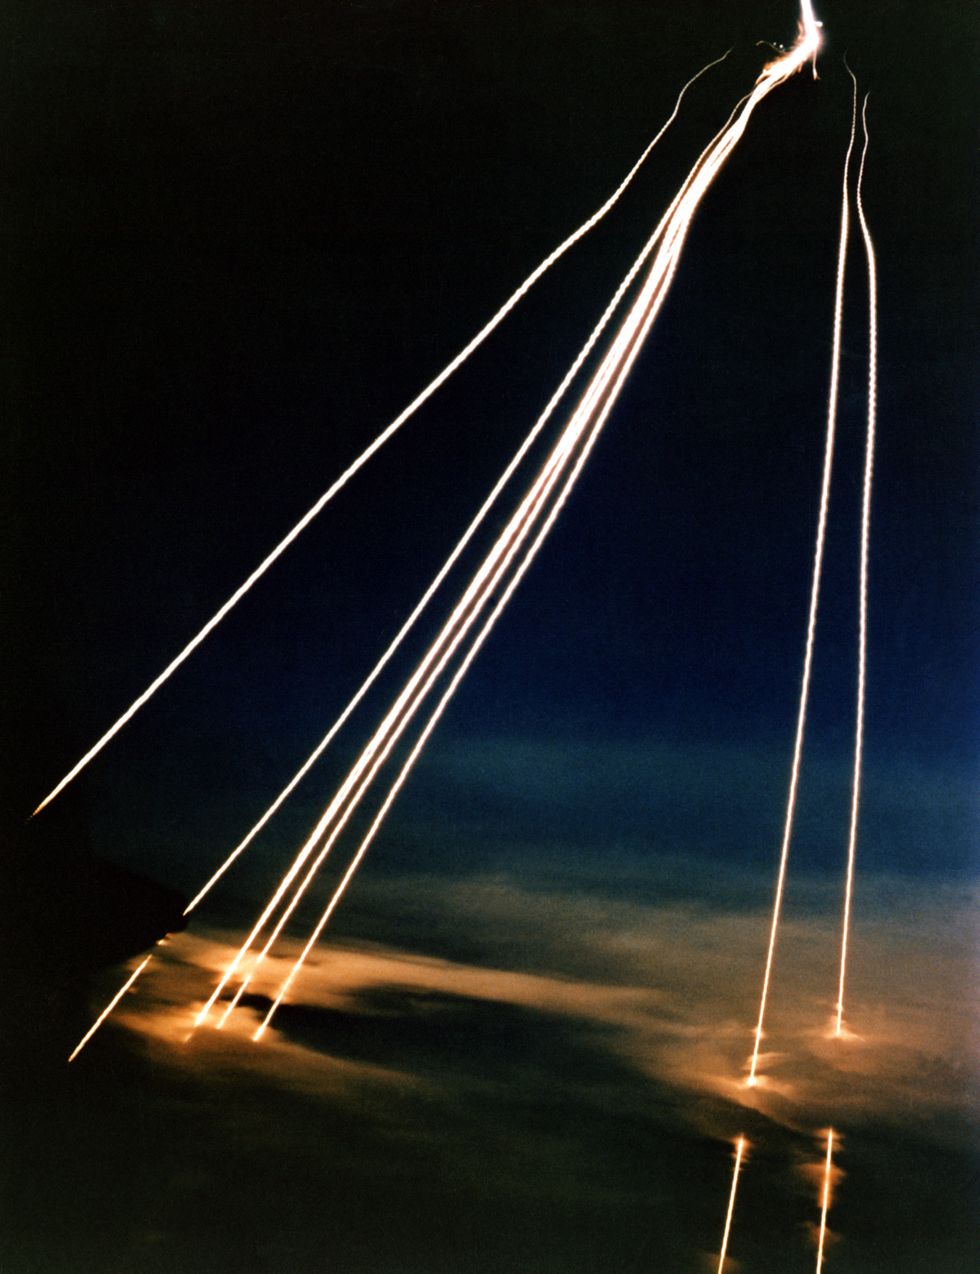 a time exposure of eight peacekeeper lgm 118a intercontinental ballistic missile reentry vehicles passing through clouds while approaching an open ocean impact zone during a flight test substandard